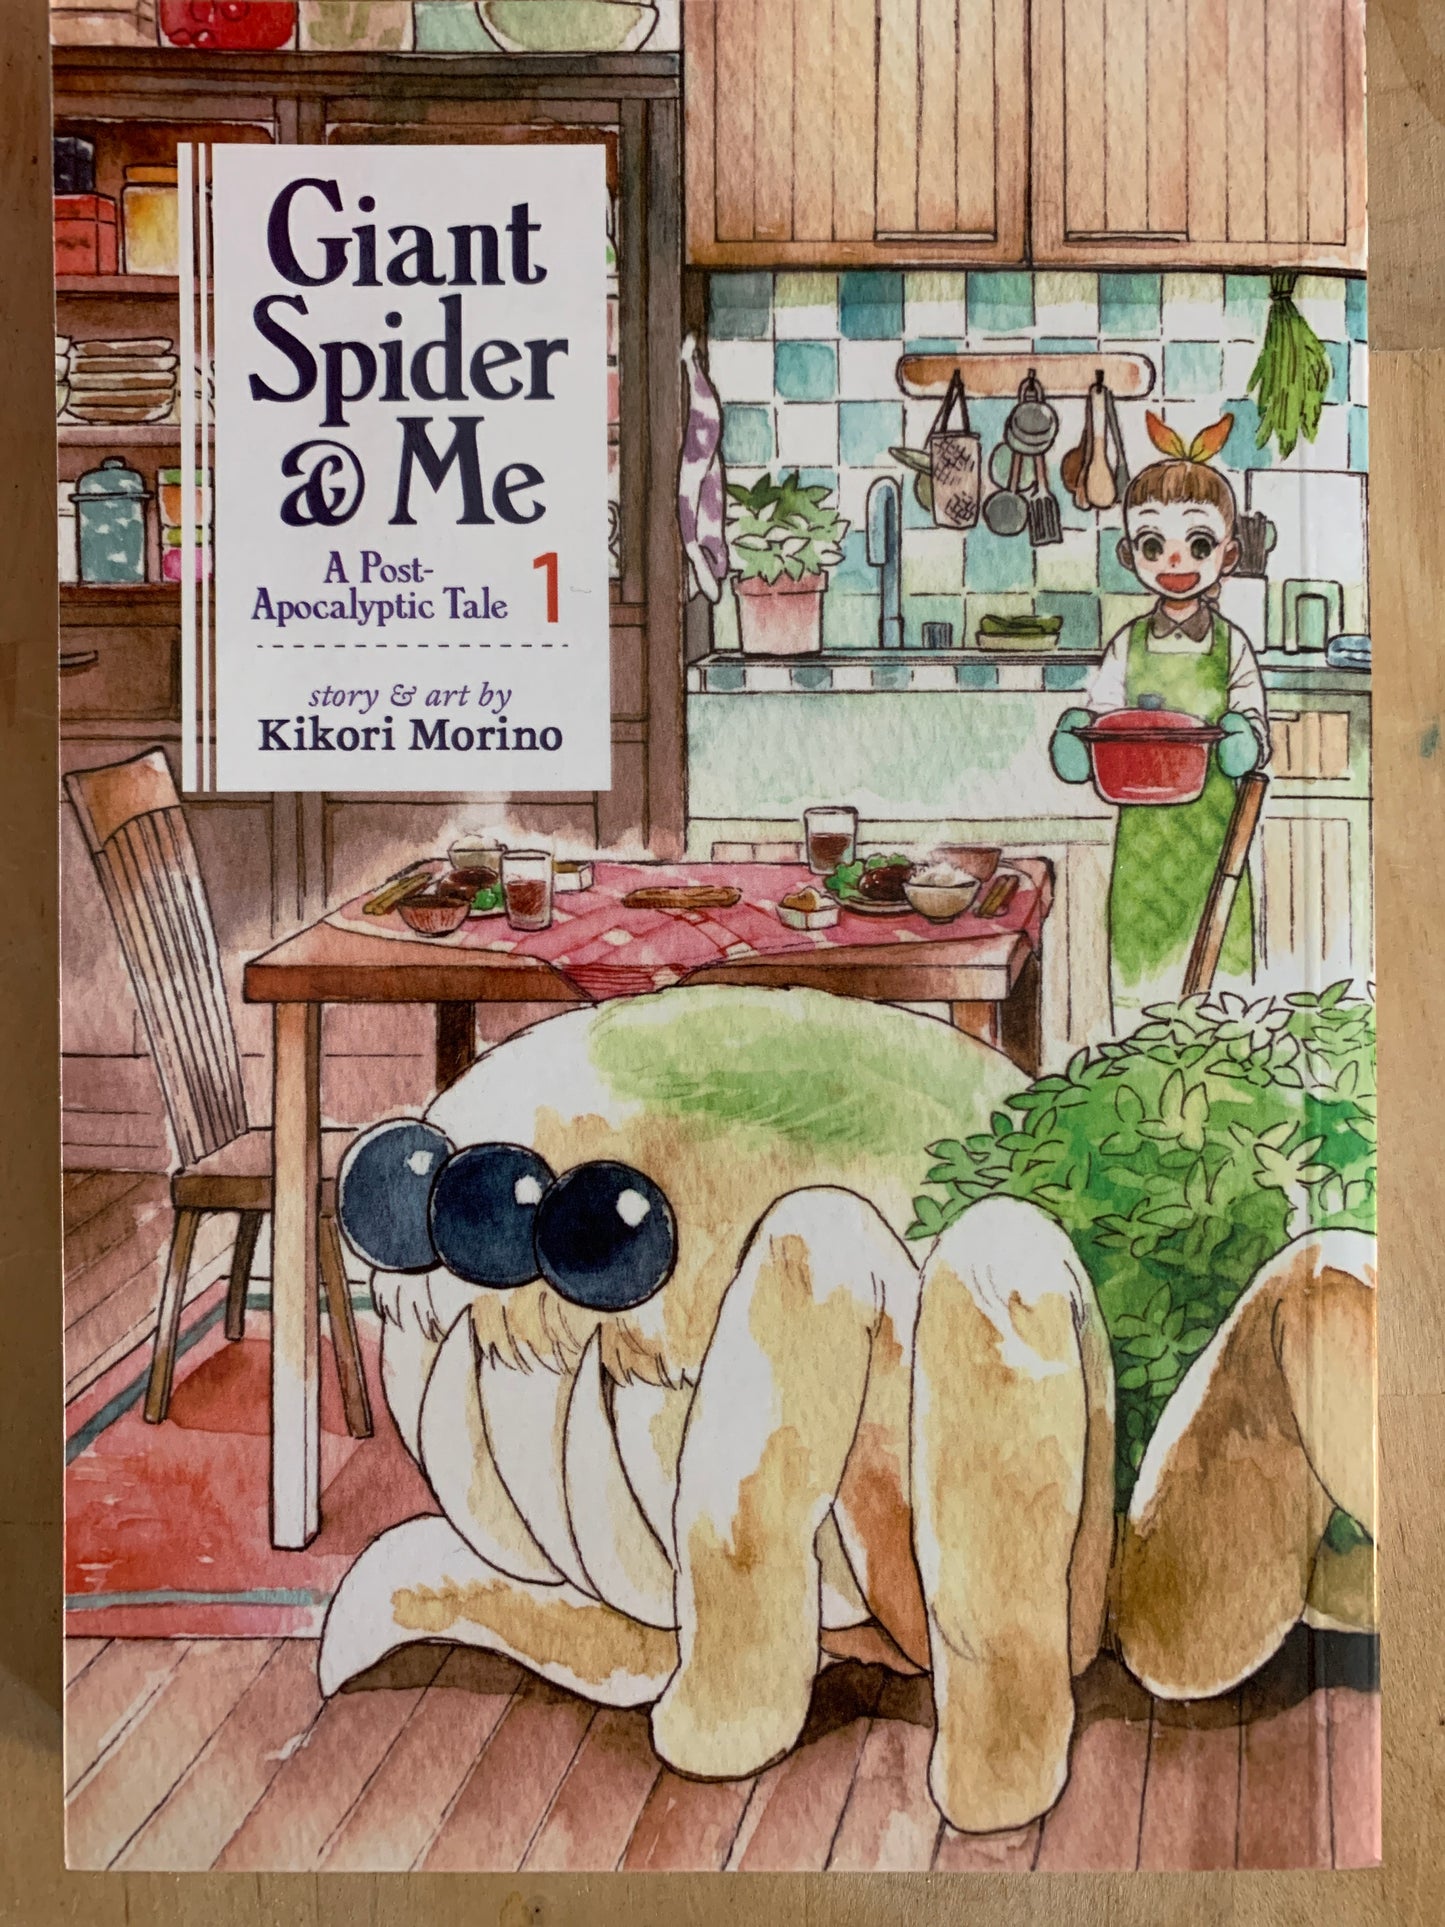 Giant Spider & Me: A Post-Apocalyptic Tale Volume 1